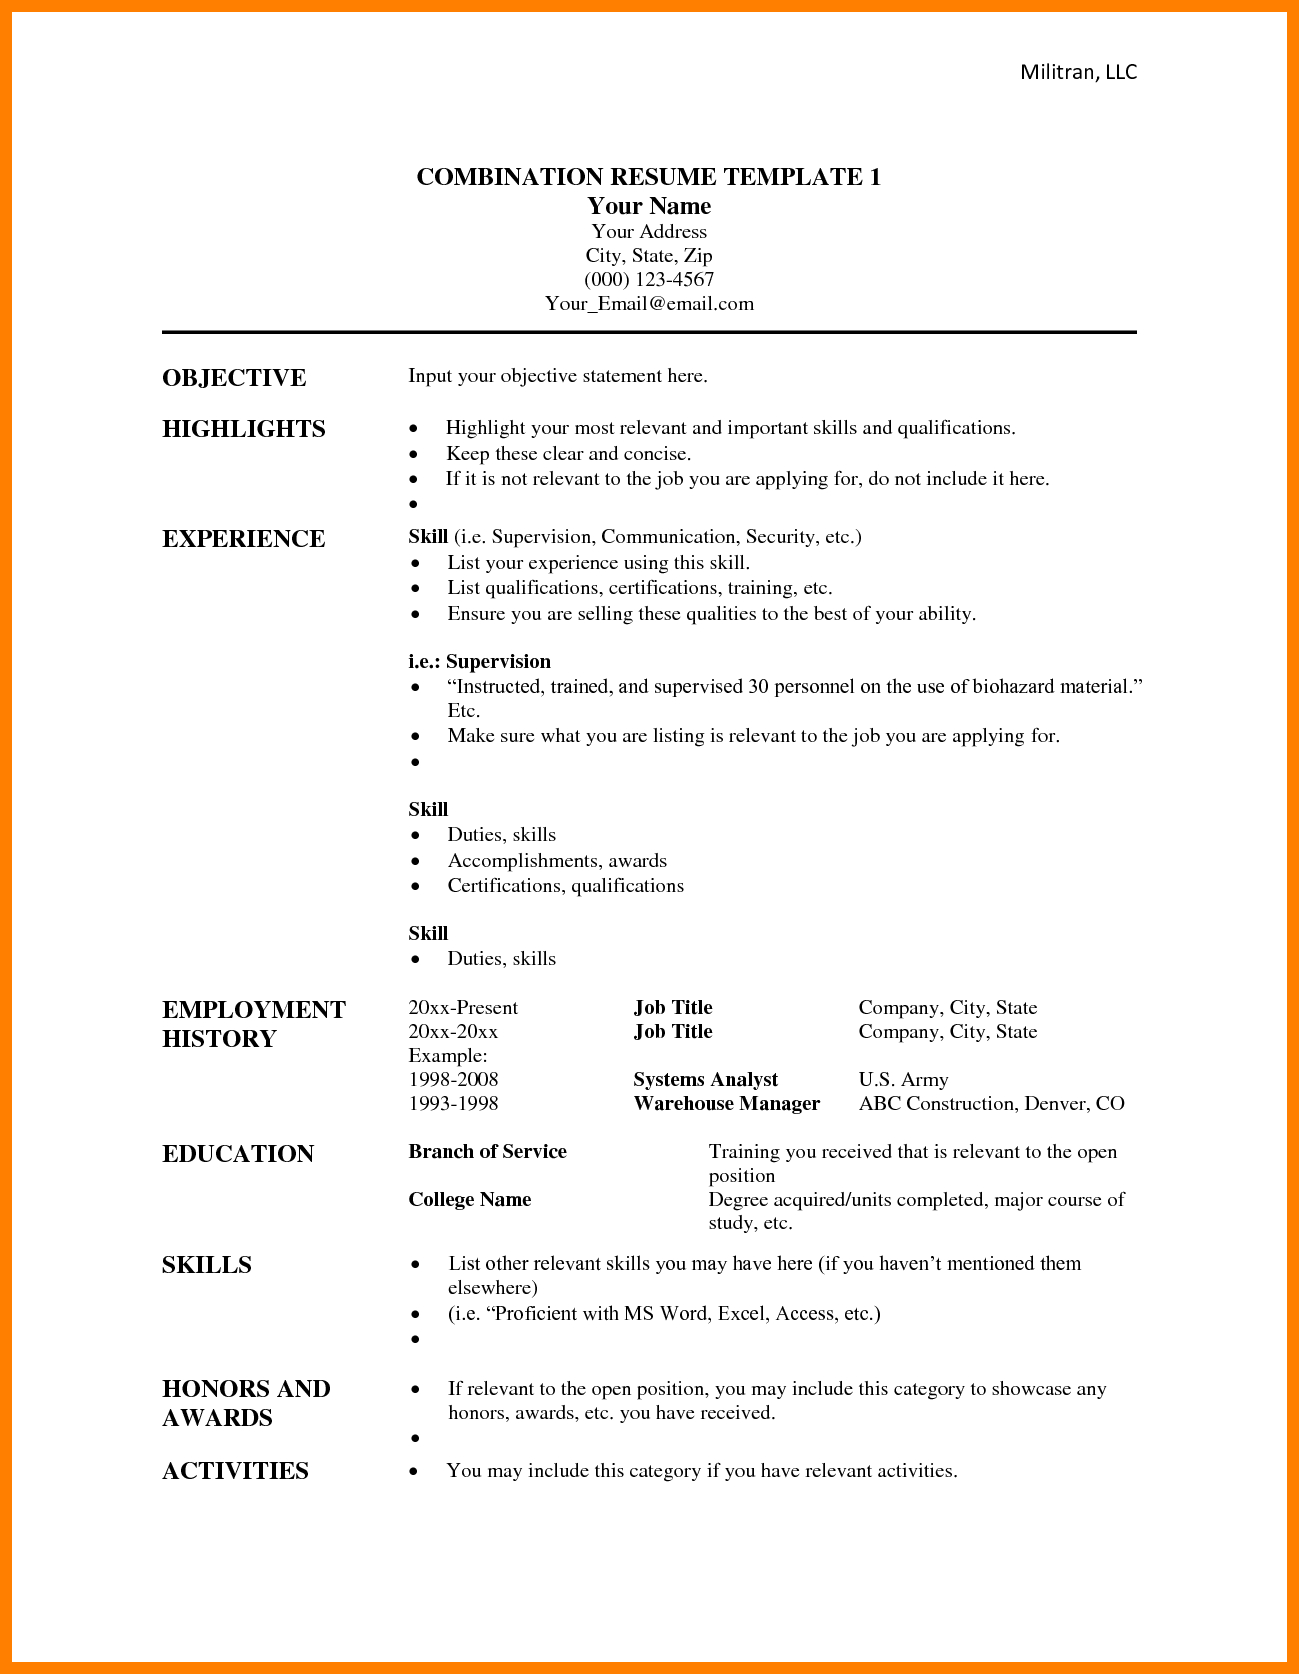 001 Functional Resume Template Microsoft Word Best Inside Combination Resume Template Word